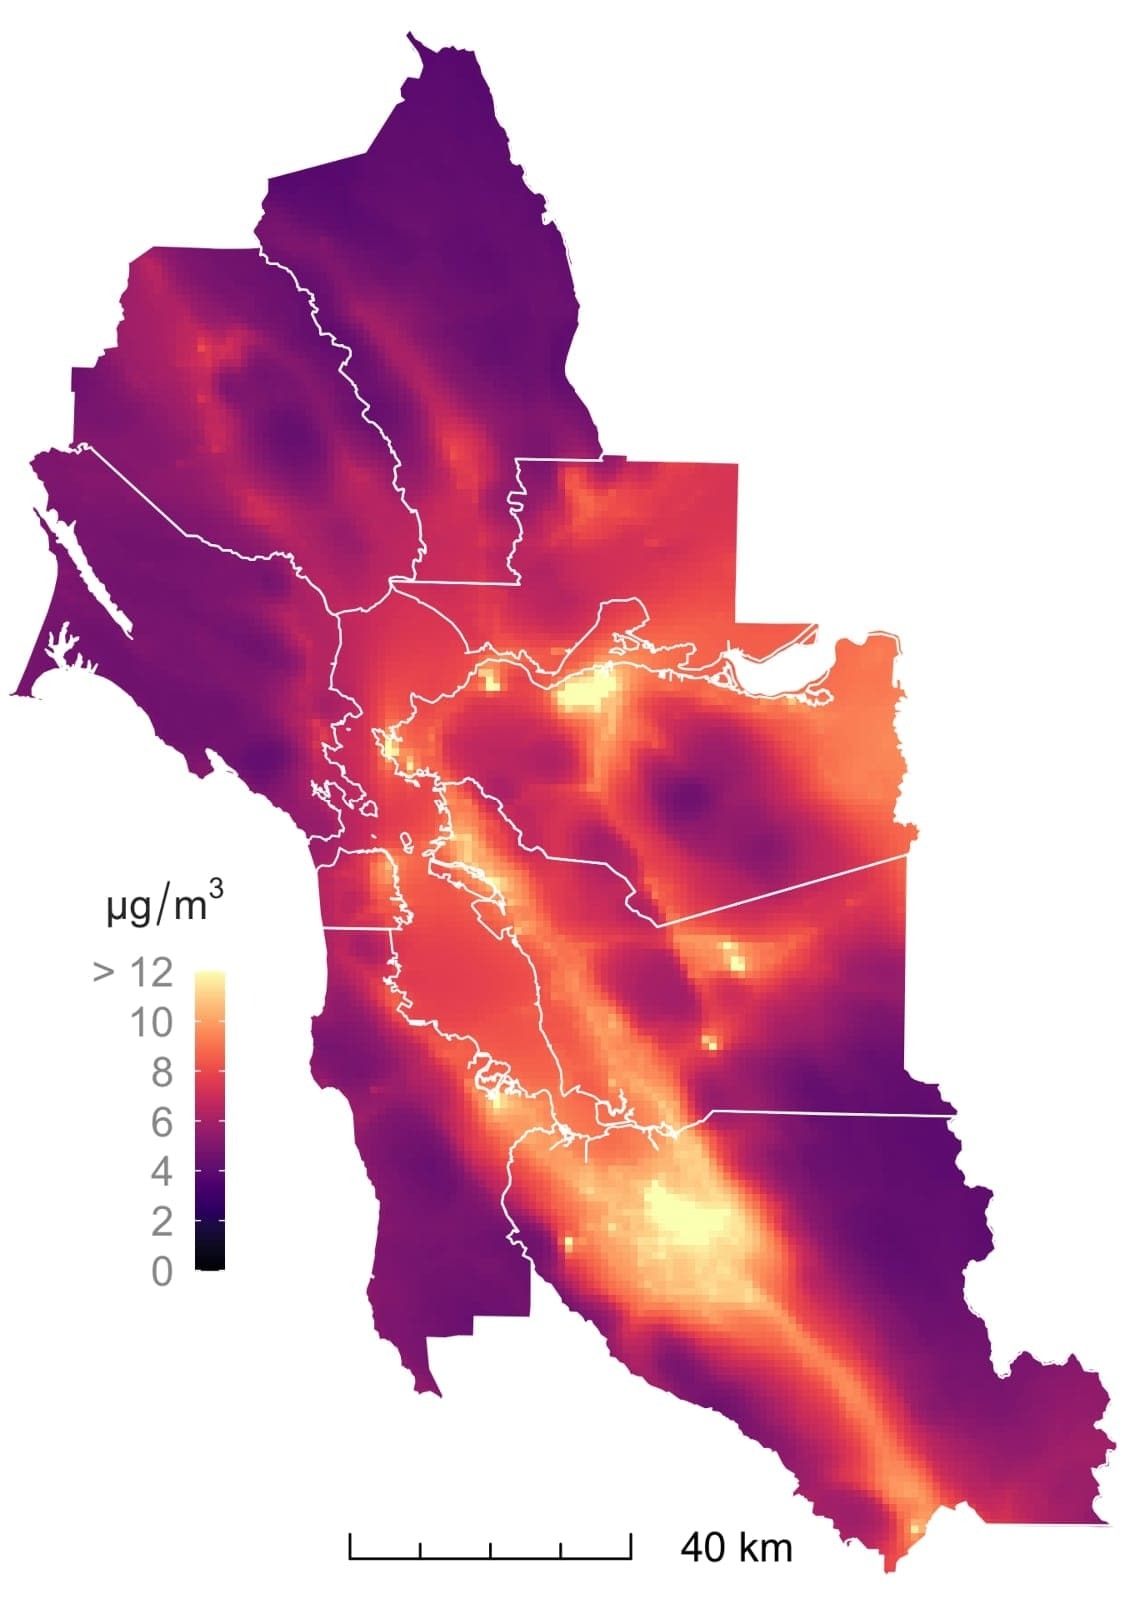 Maps showing reduction in particulate matter